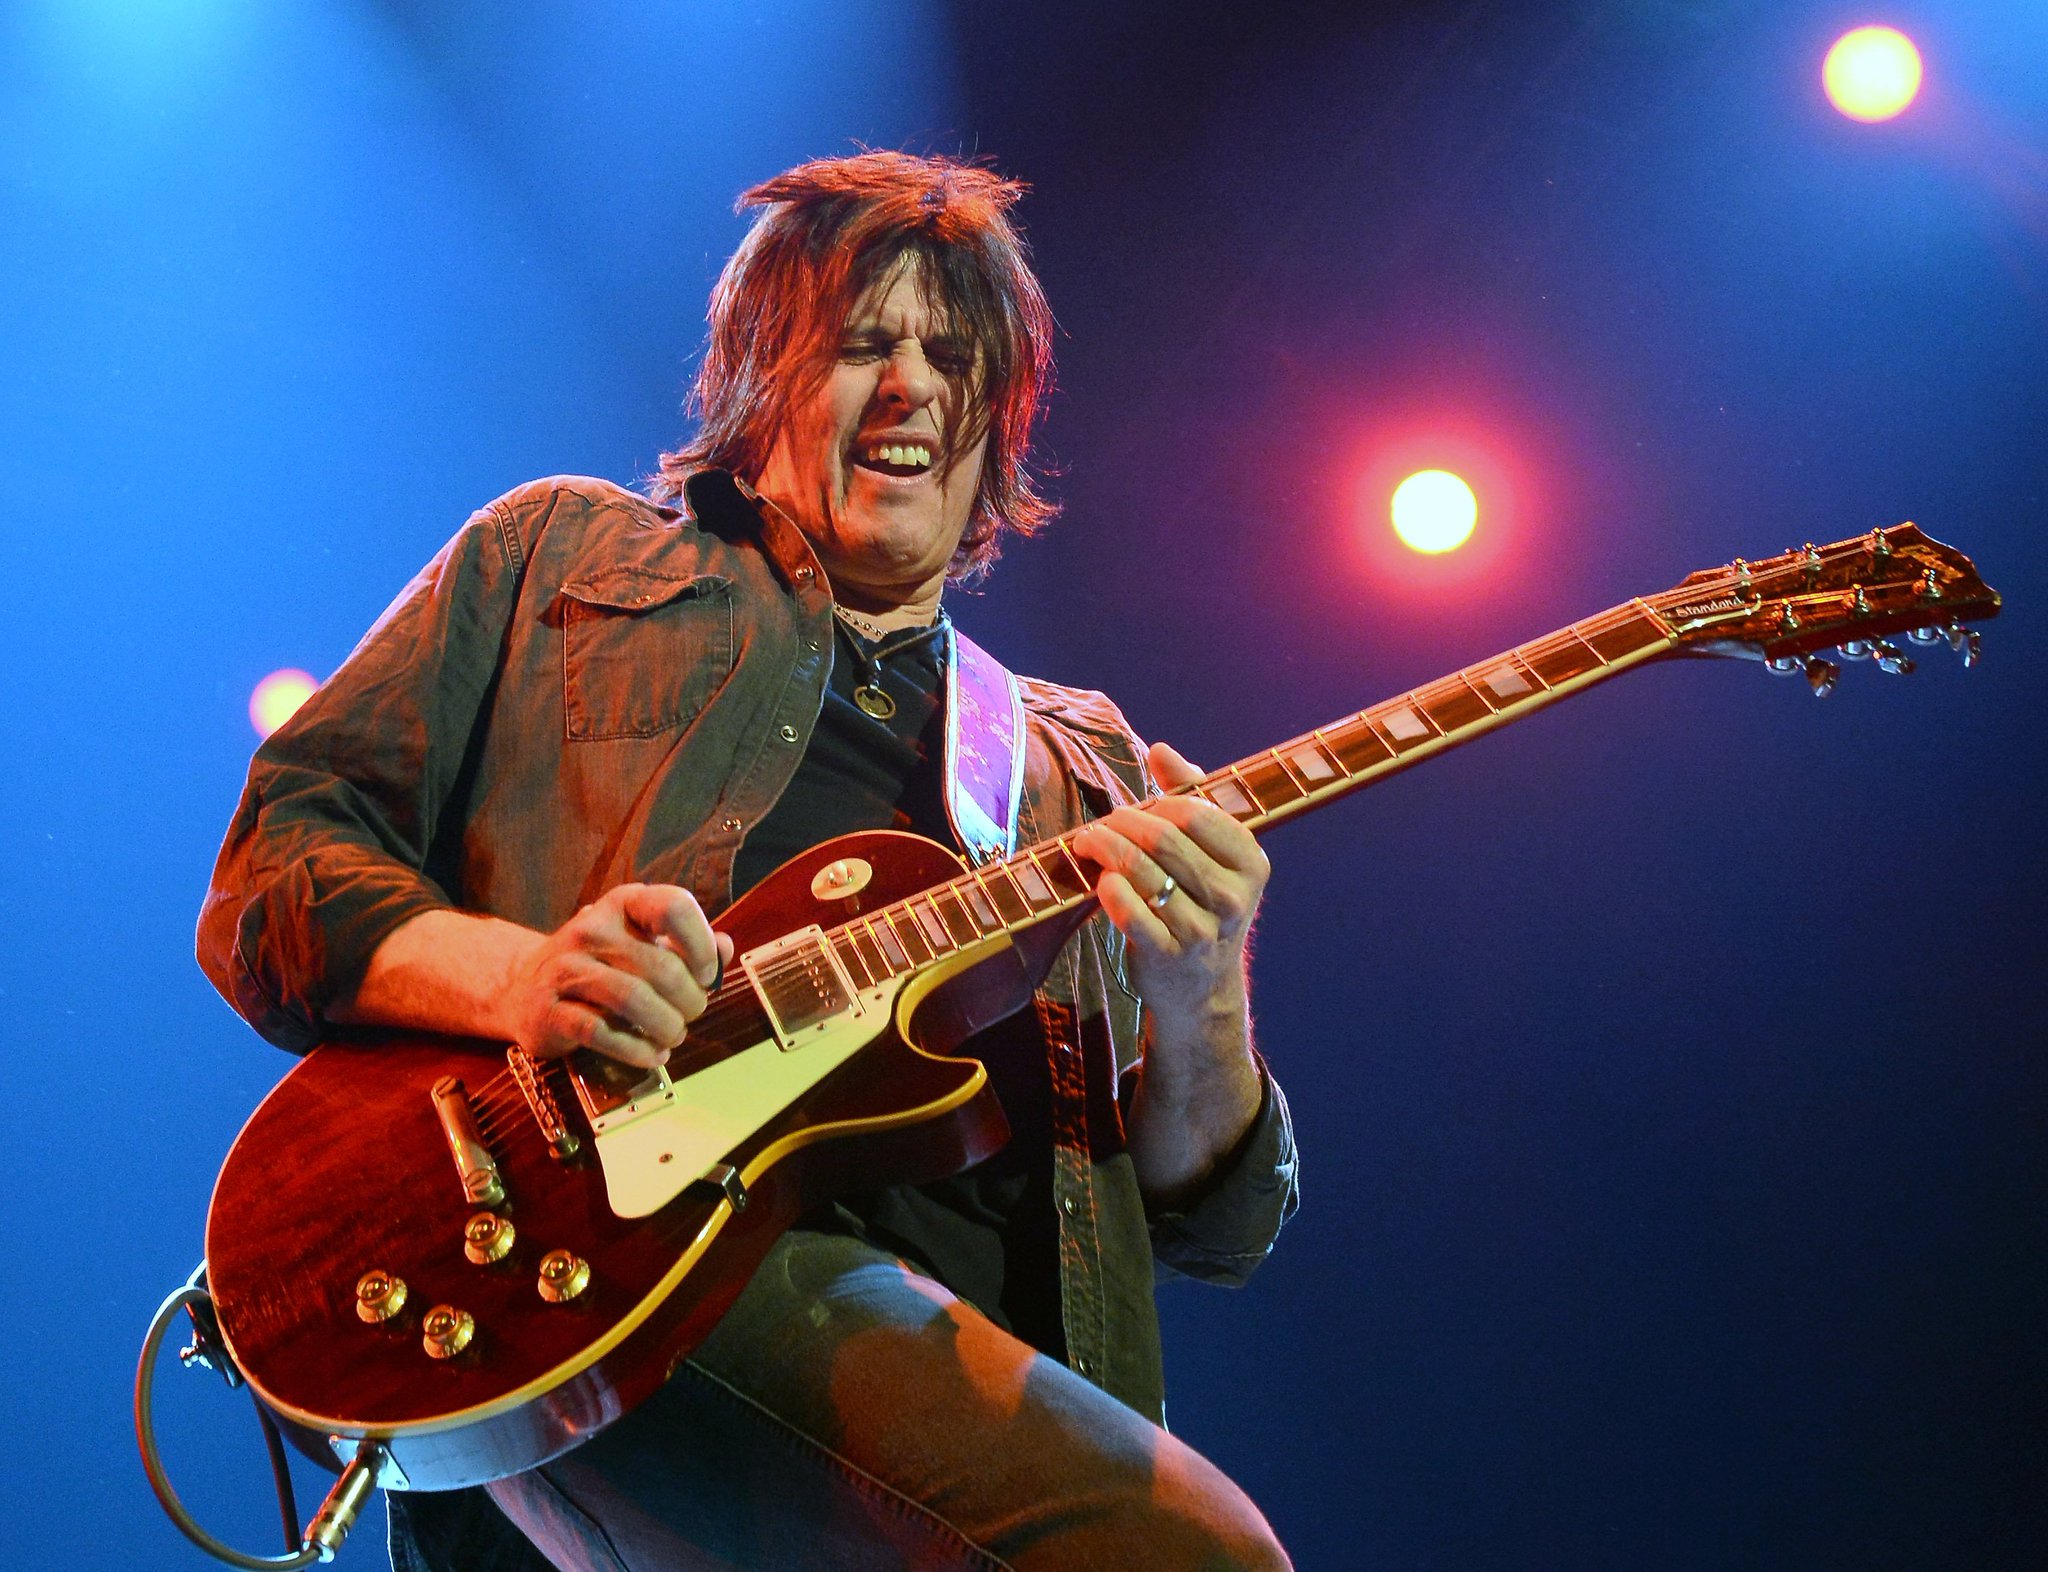 Happy birthday to Stone Temple Pilots guitarist, Dean DeLeo! he turns 58 today! 